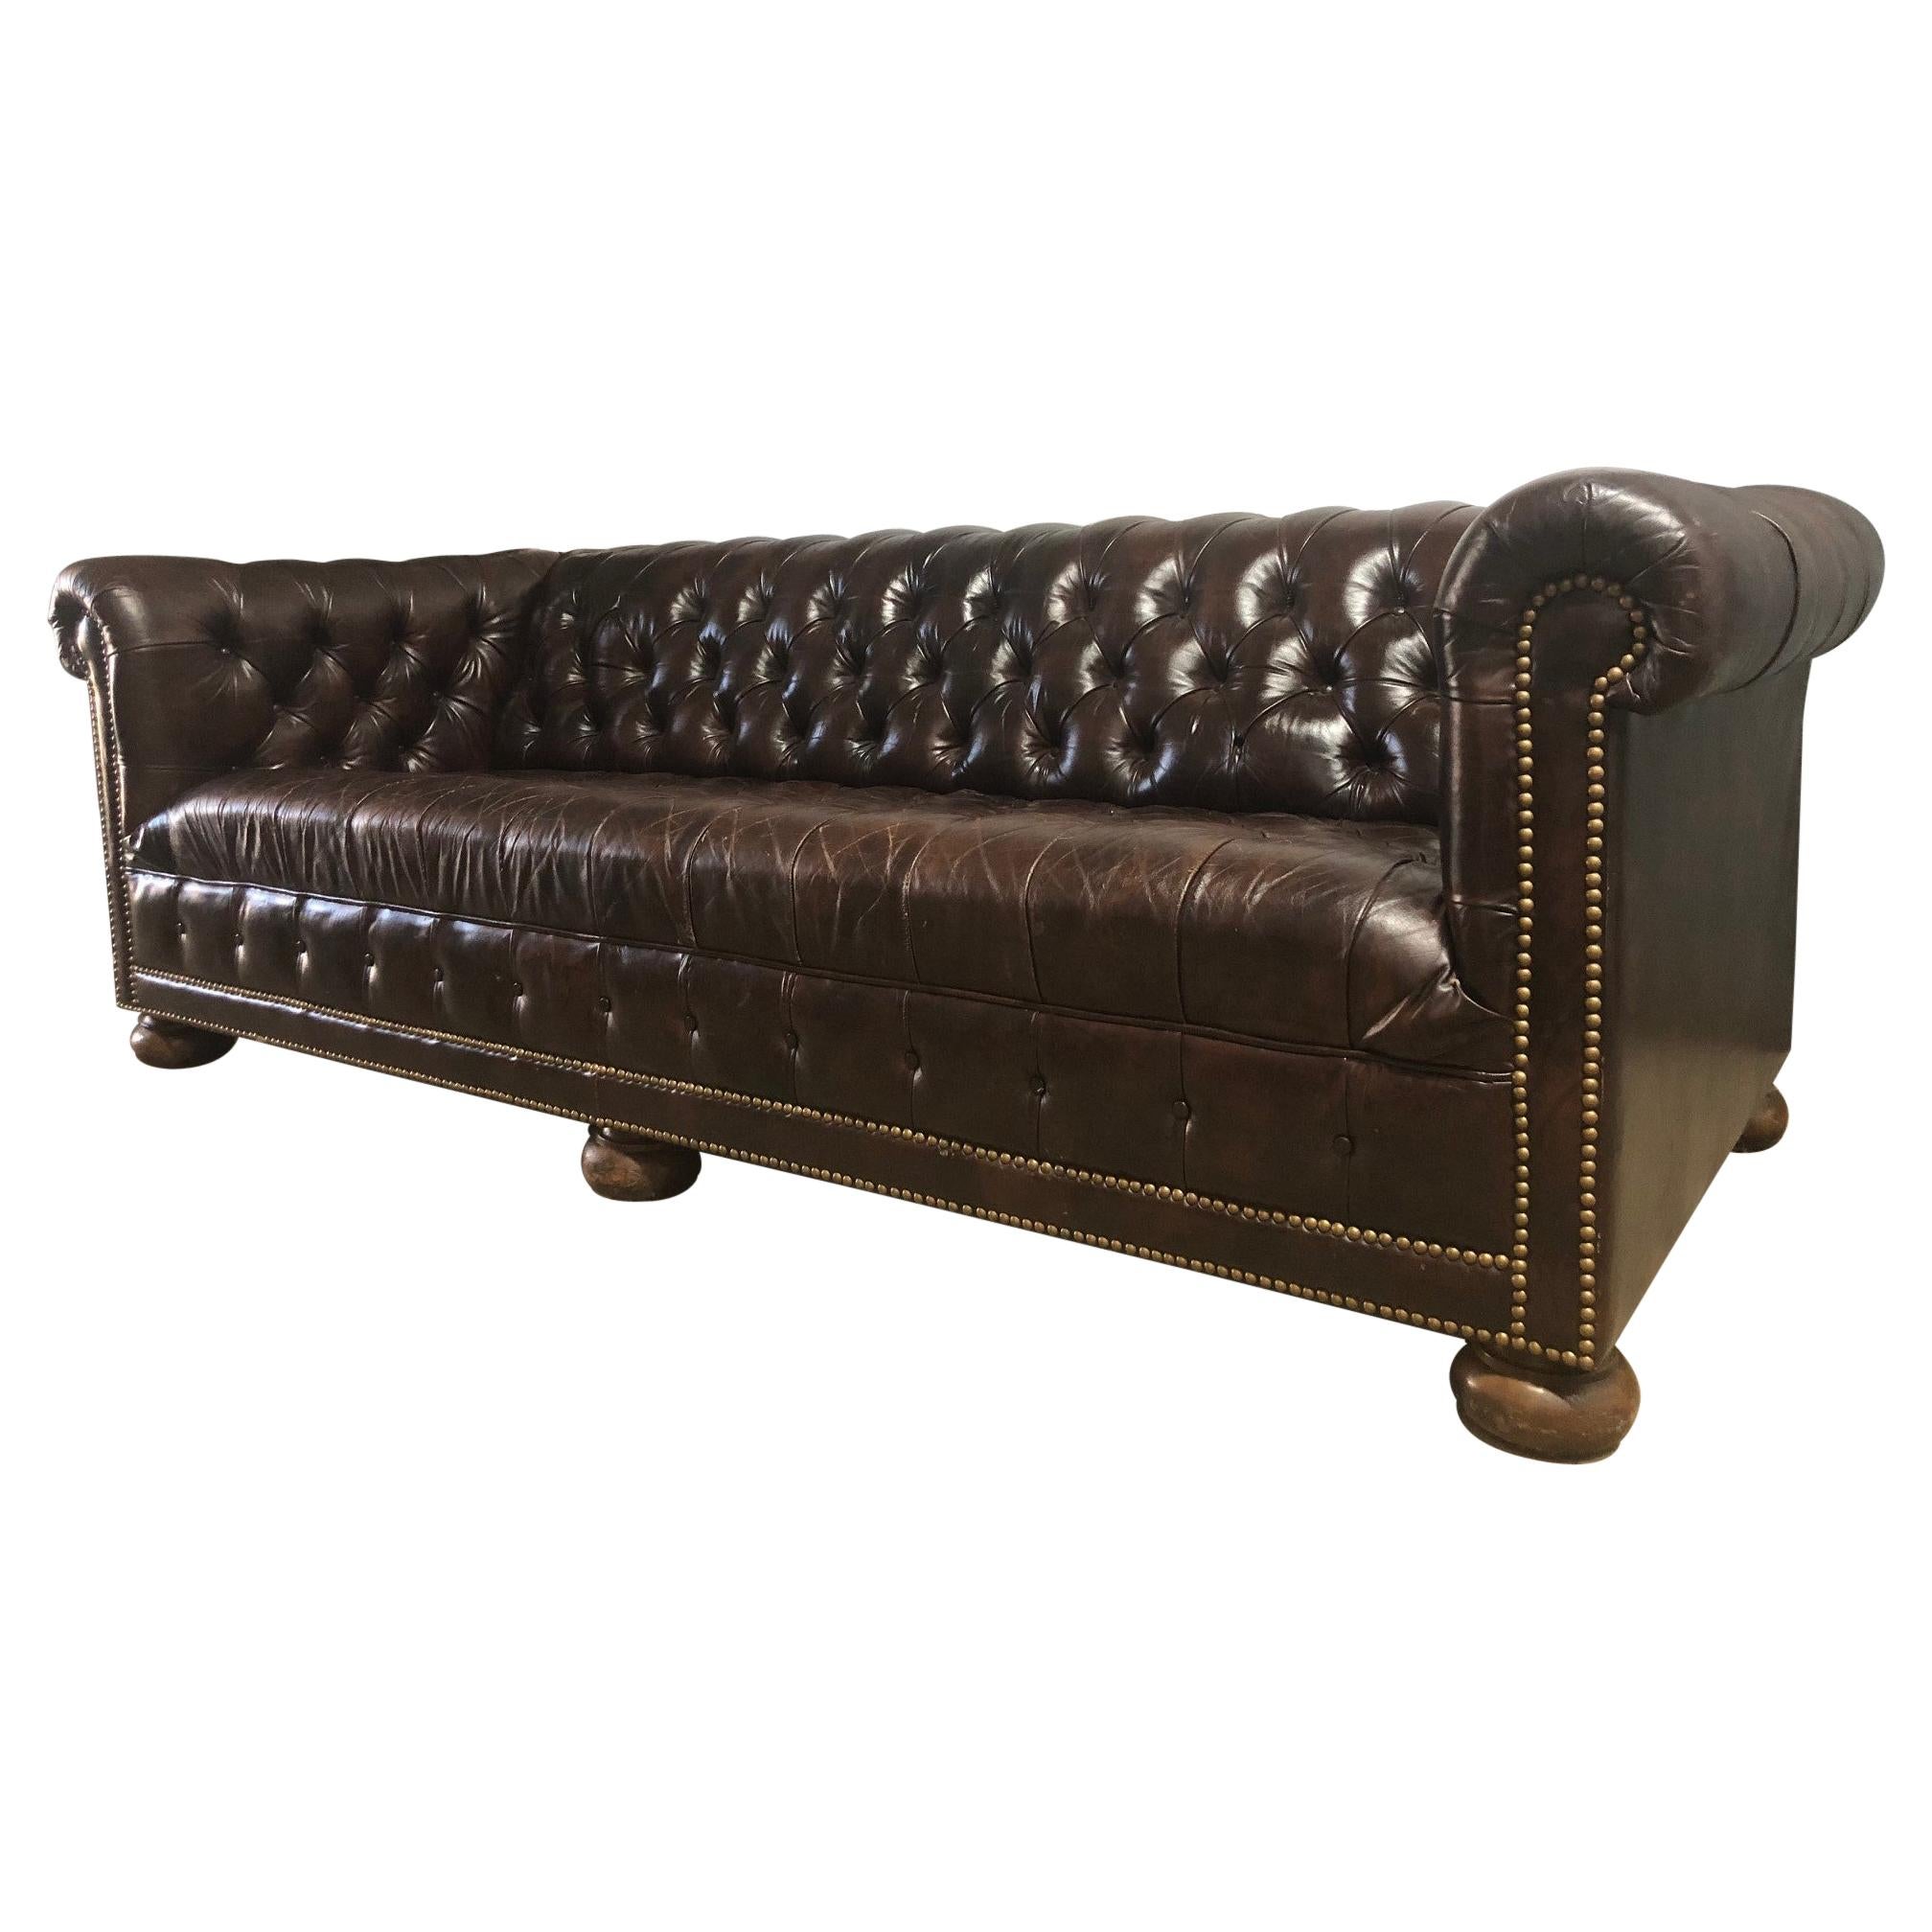 French Carved Fruitwood Pantone Blue Tufted Chesterfield Sofa at